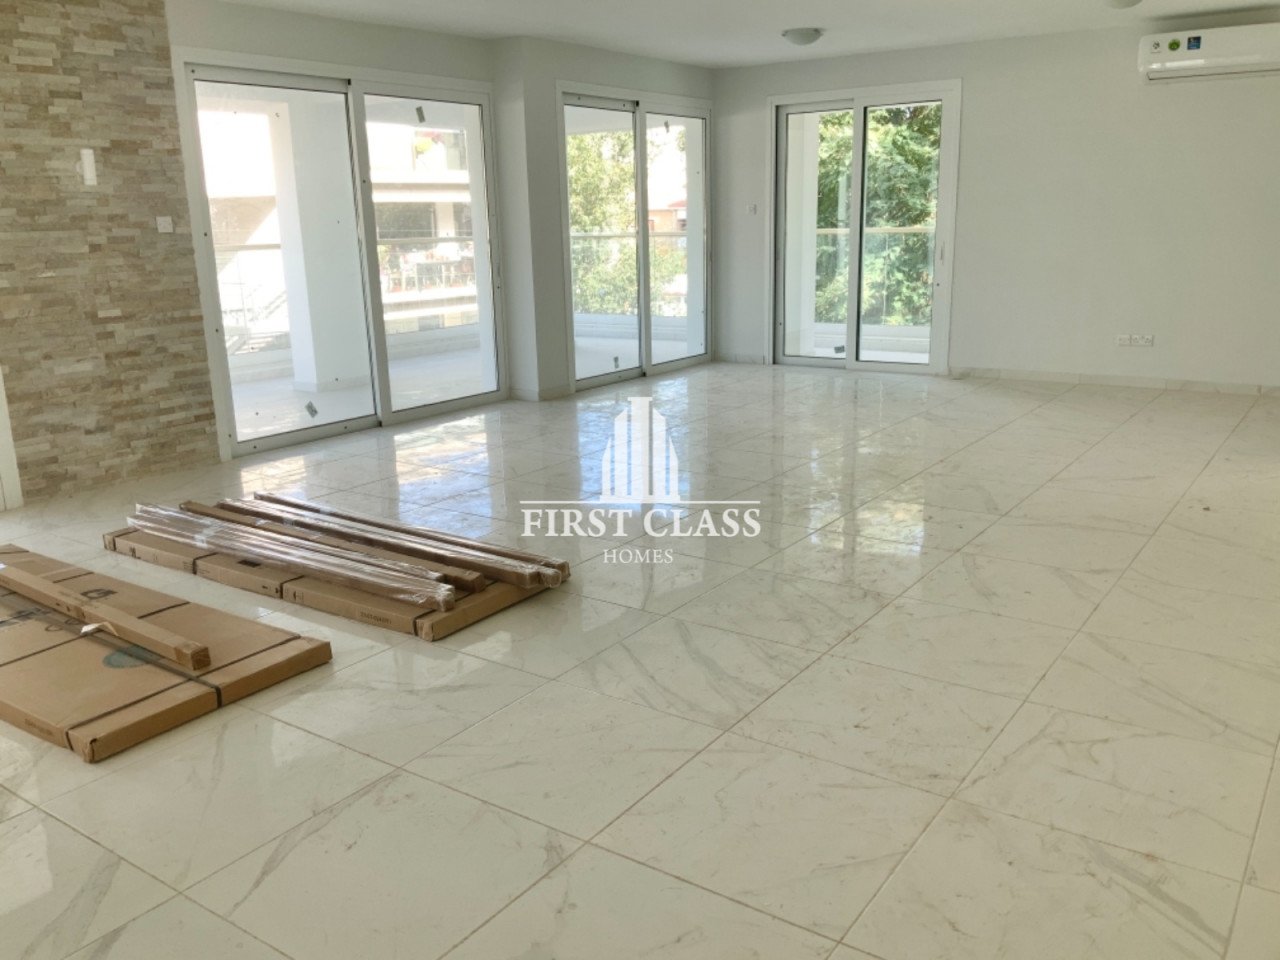 Property for Rent: Apartment (Flat) in Agios Andreas, Nicosia for Rent | Key Realtor Cyprus